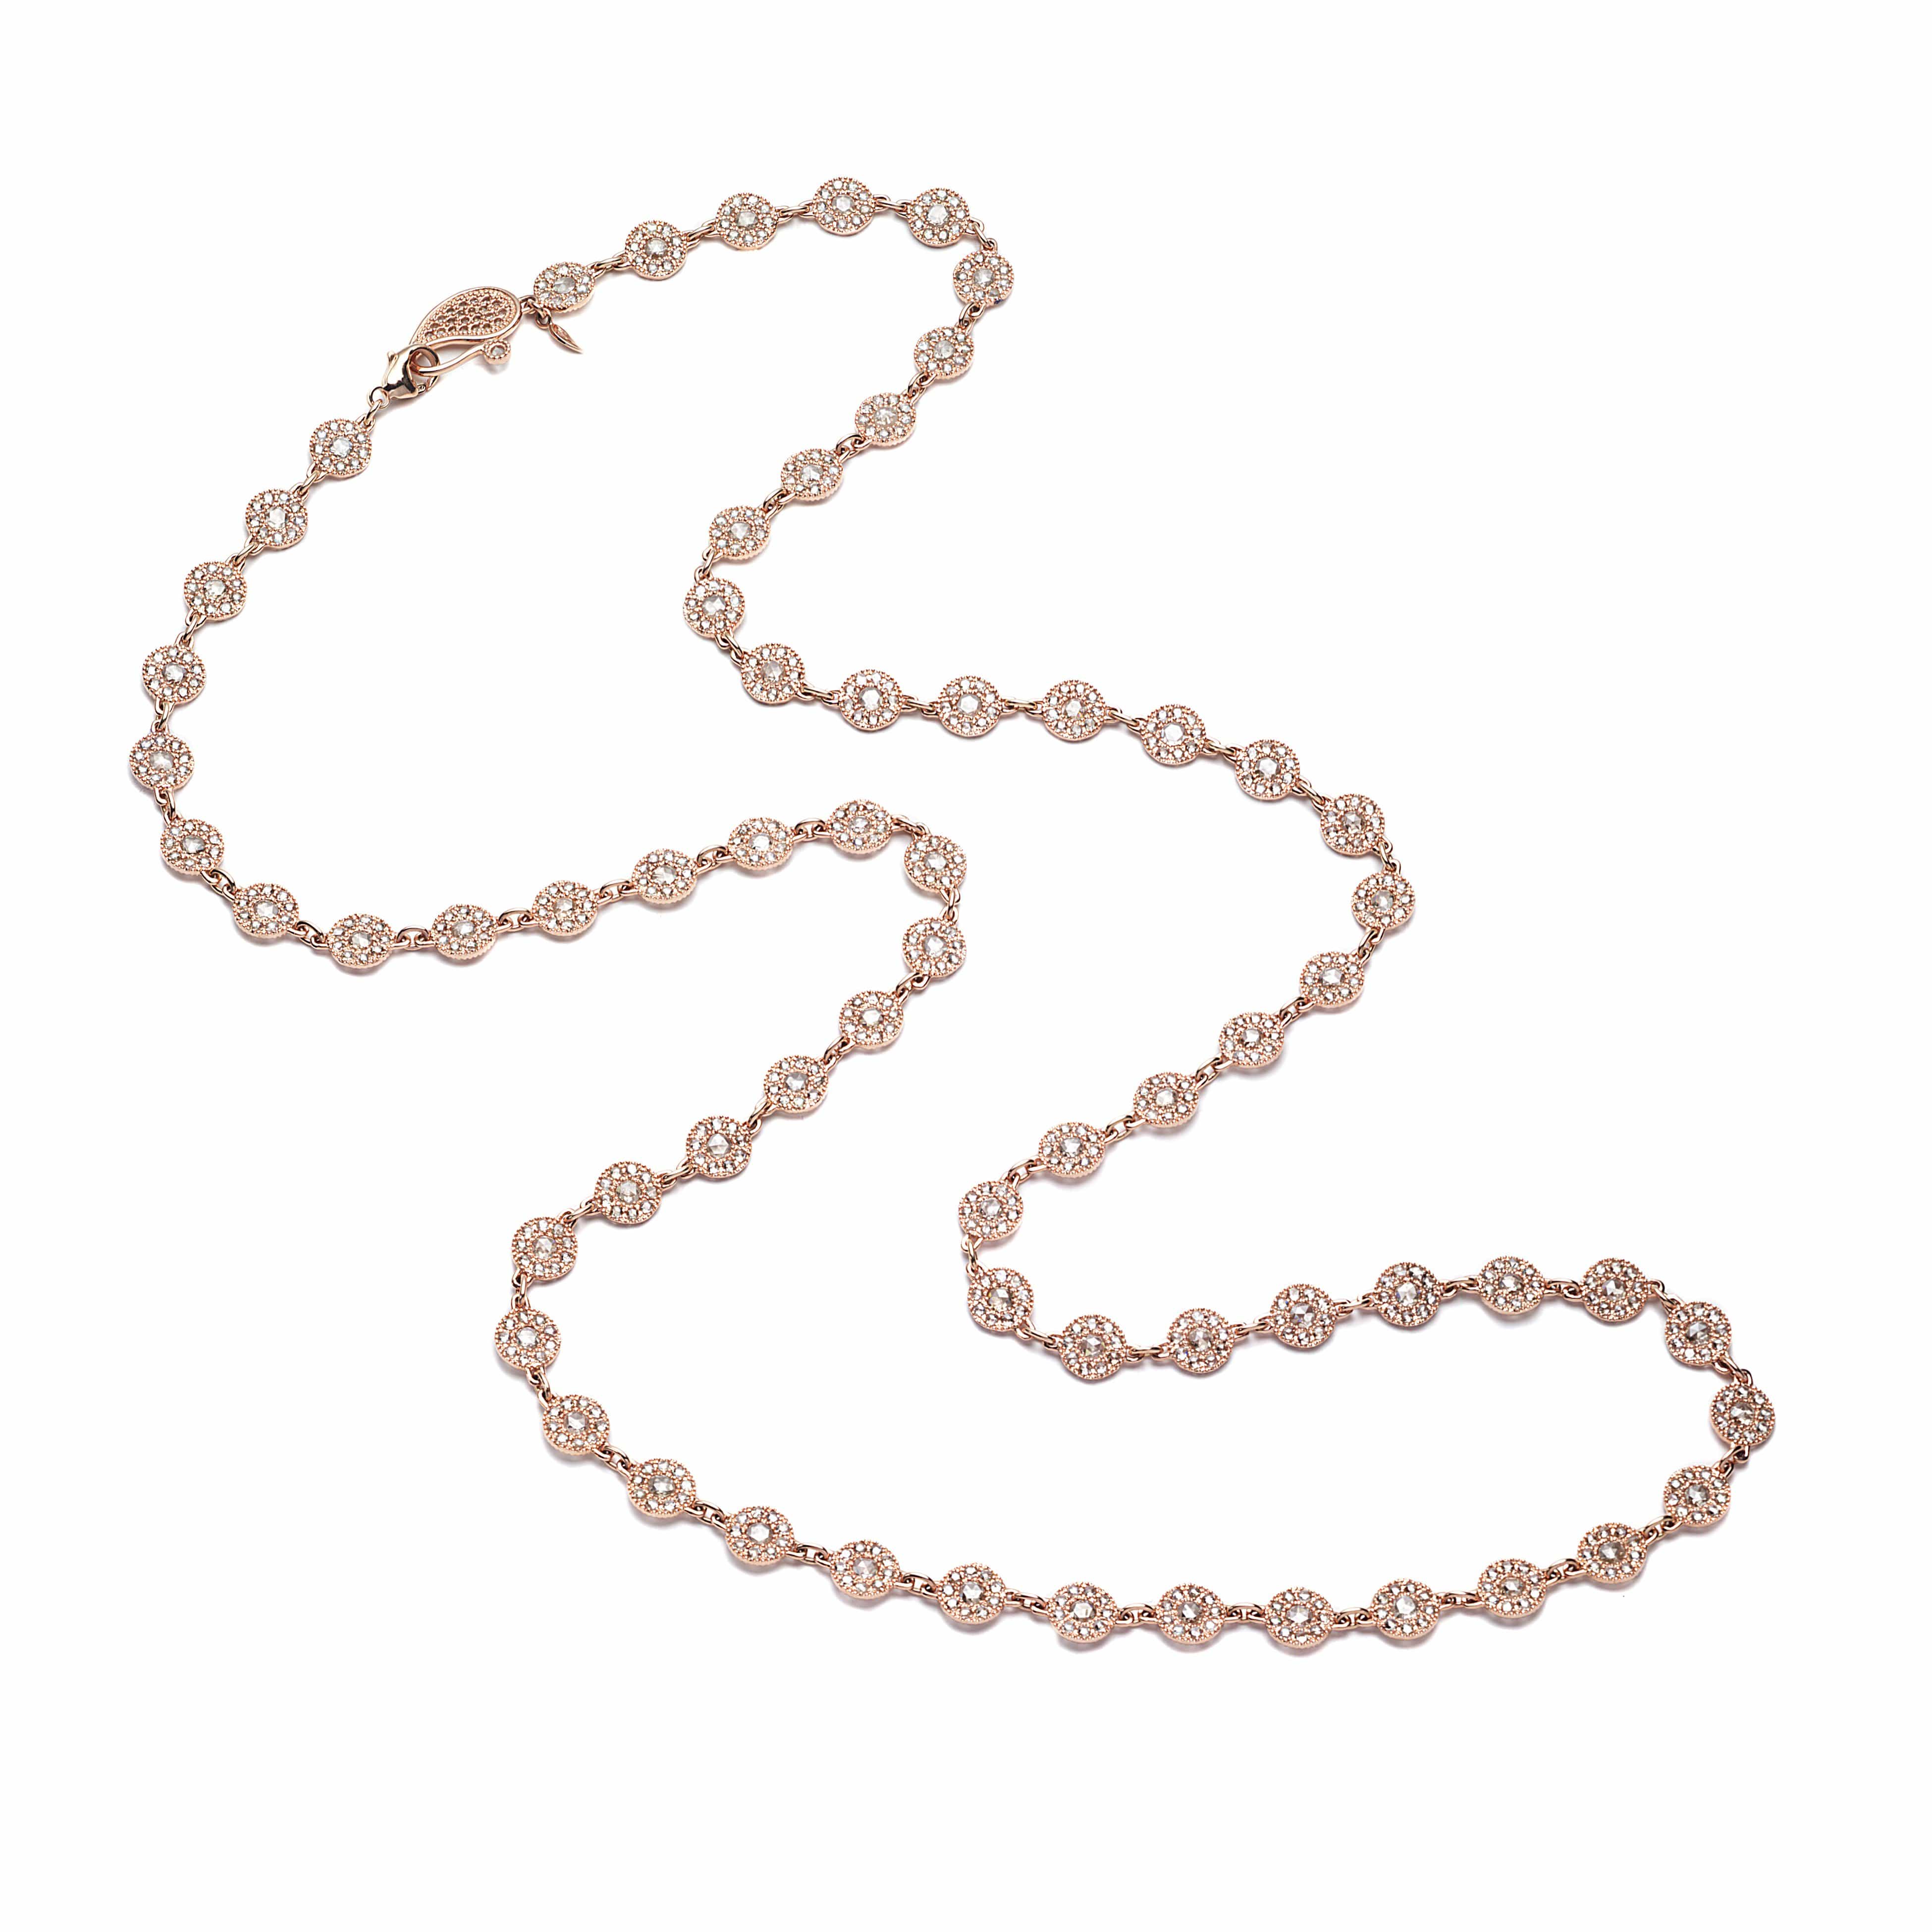 Eternity 18K Rose Gold “Opera” Necklace - Coomi